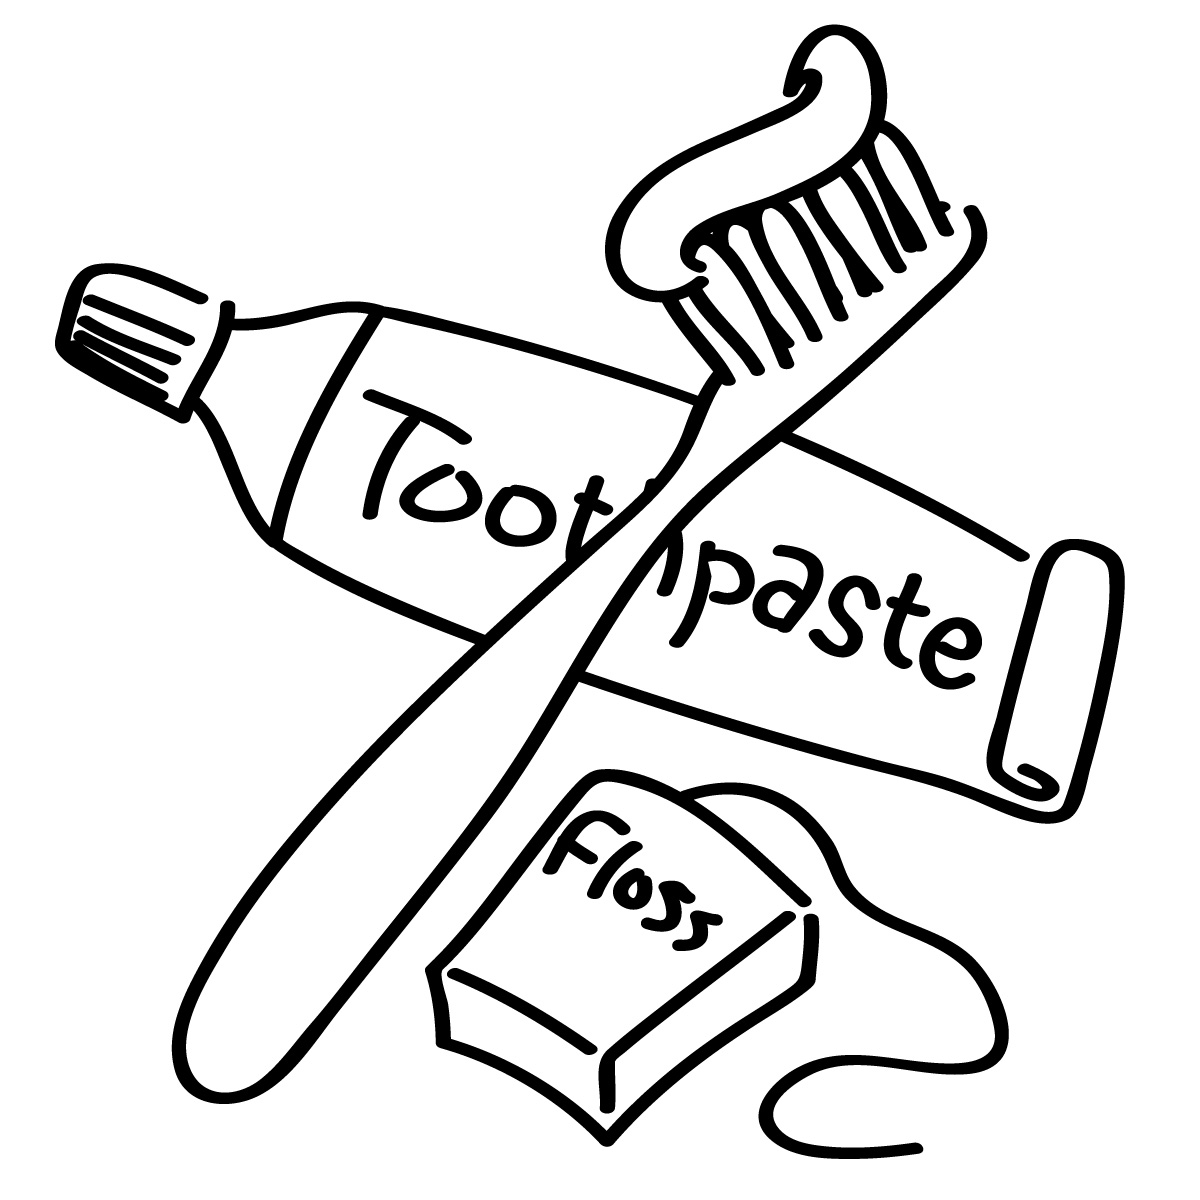 Brush teeth brushing teeth coloring pages 4fbb8 clip art